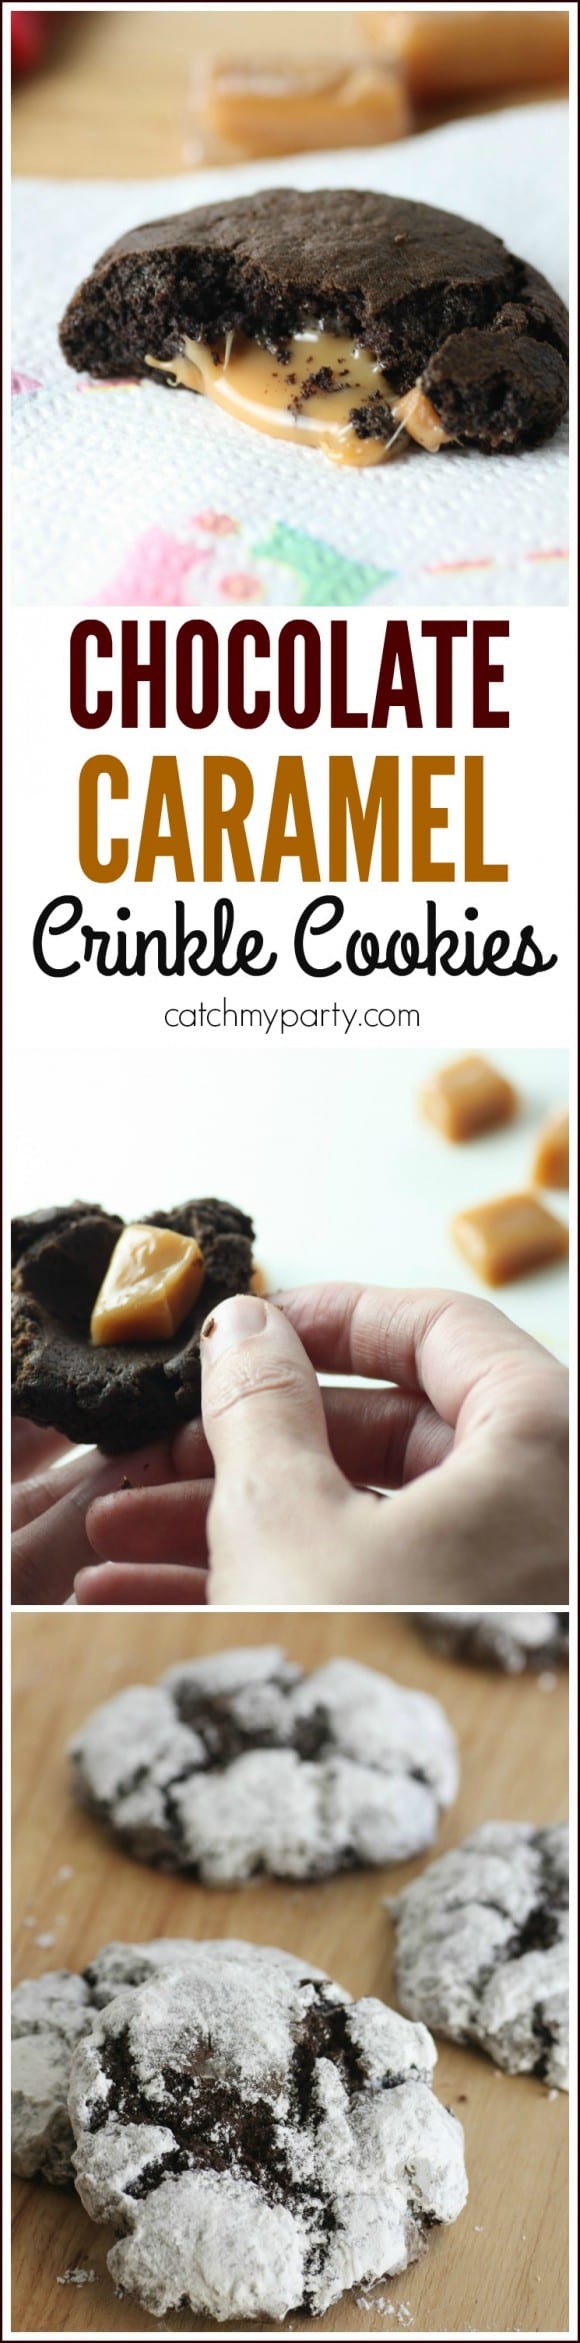 Easy Caramel Chocolate Crinkle Cookie Recipe | CatchMyParty.com